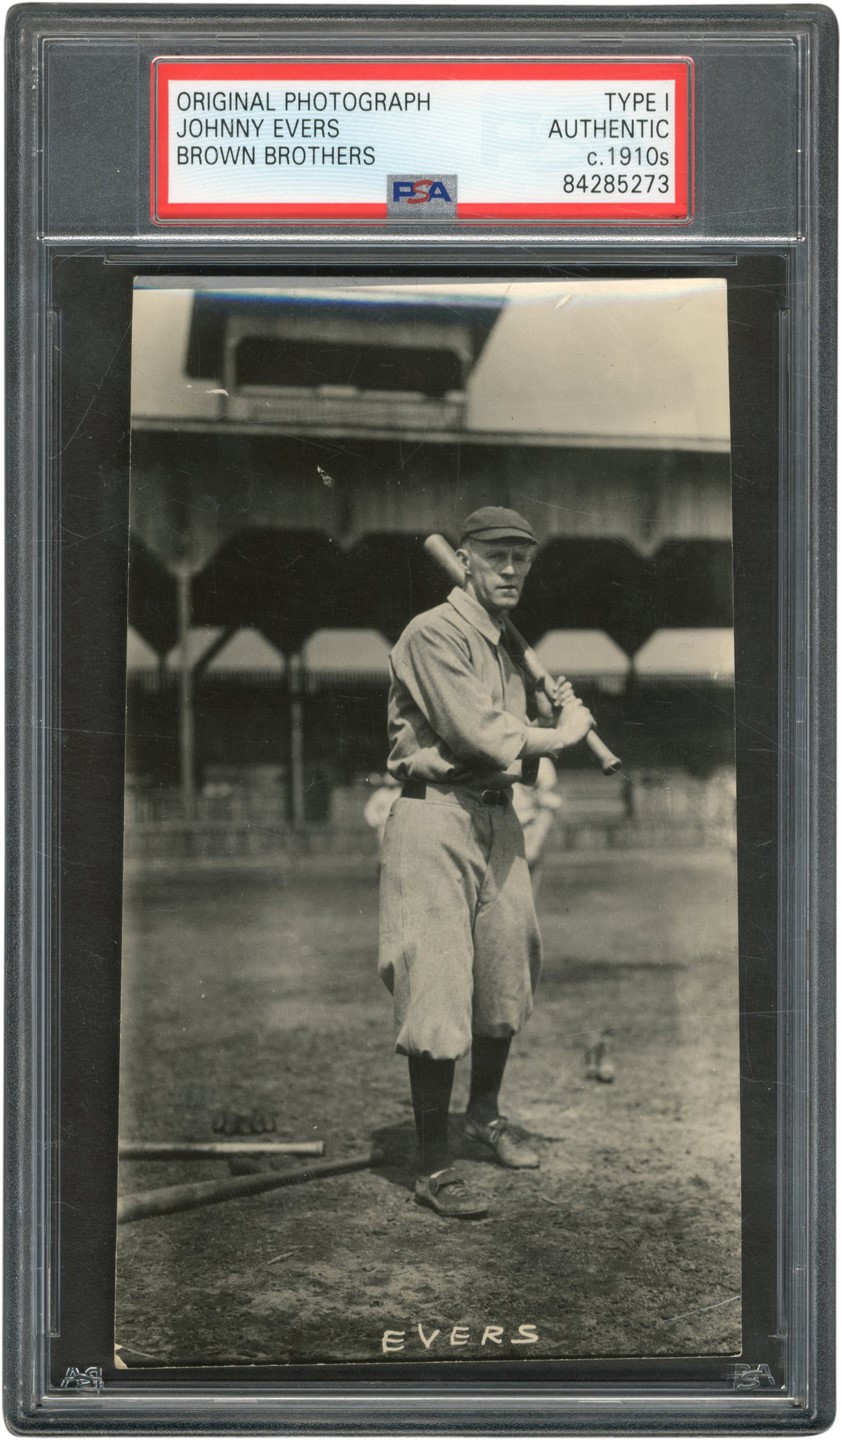 The Brown Brothers Collection - Johnny Evers Chicago Cubs Photograph (PSA Type I)